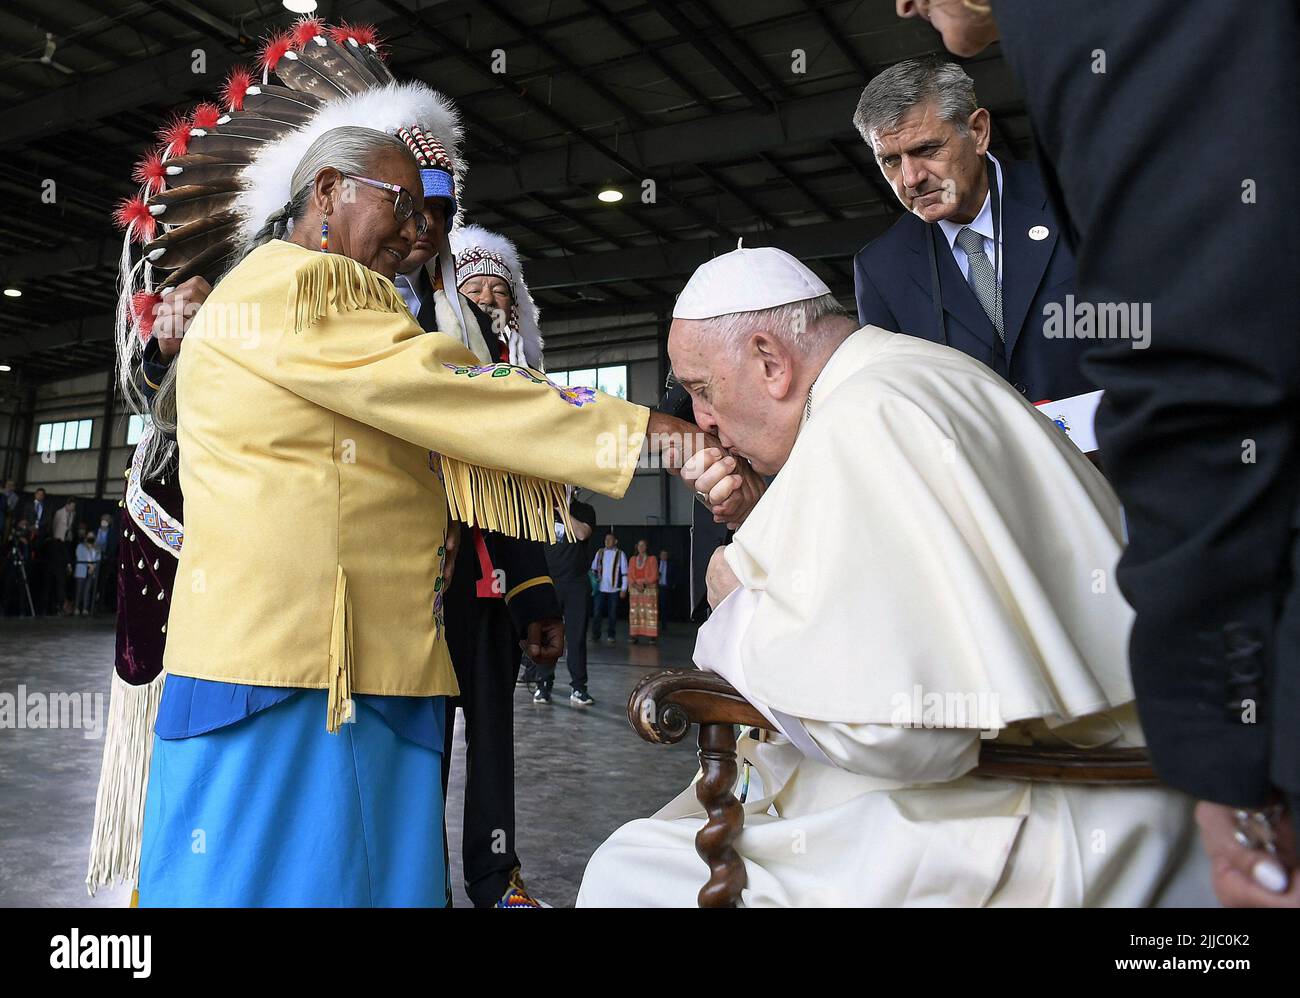 Edmonton, Canada. 24th July, 2022. Pope Francis kisses the hand of residential school survivor Elder Alma Desjarlais of the Frog Lake First Nation during his welcoming ceremony at Edmonton International Airport, AB, western Canada on July 24, 2022 for his six-day papal visit across Canada. Pope's visit to Canada is aimed at reconciliation with Indigenous people for the Catholic Church's role in residential schools. Photo by Vatican Media (EV)/ABACAPRESS.COM Credit: Abaca Press/Alamy Live News Stock Photo